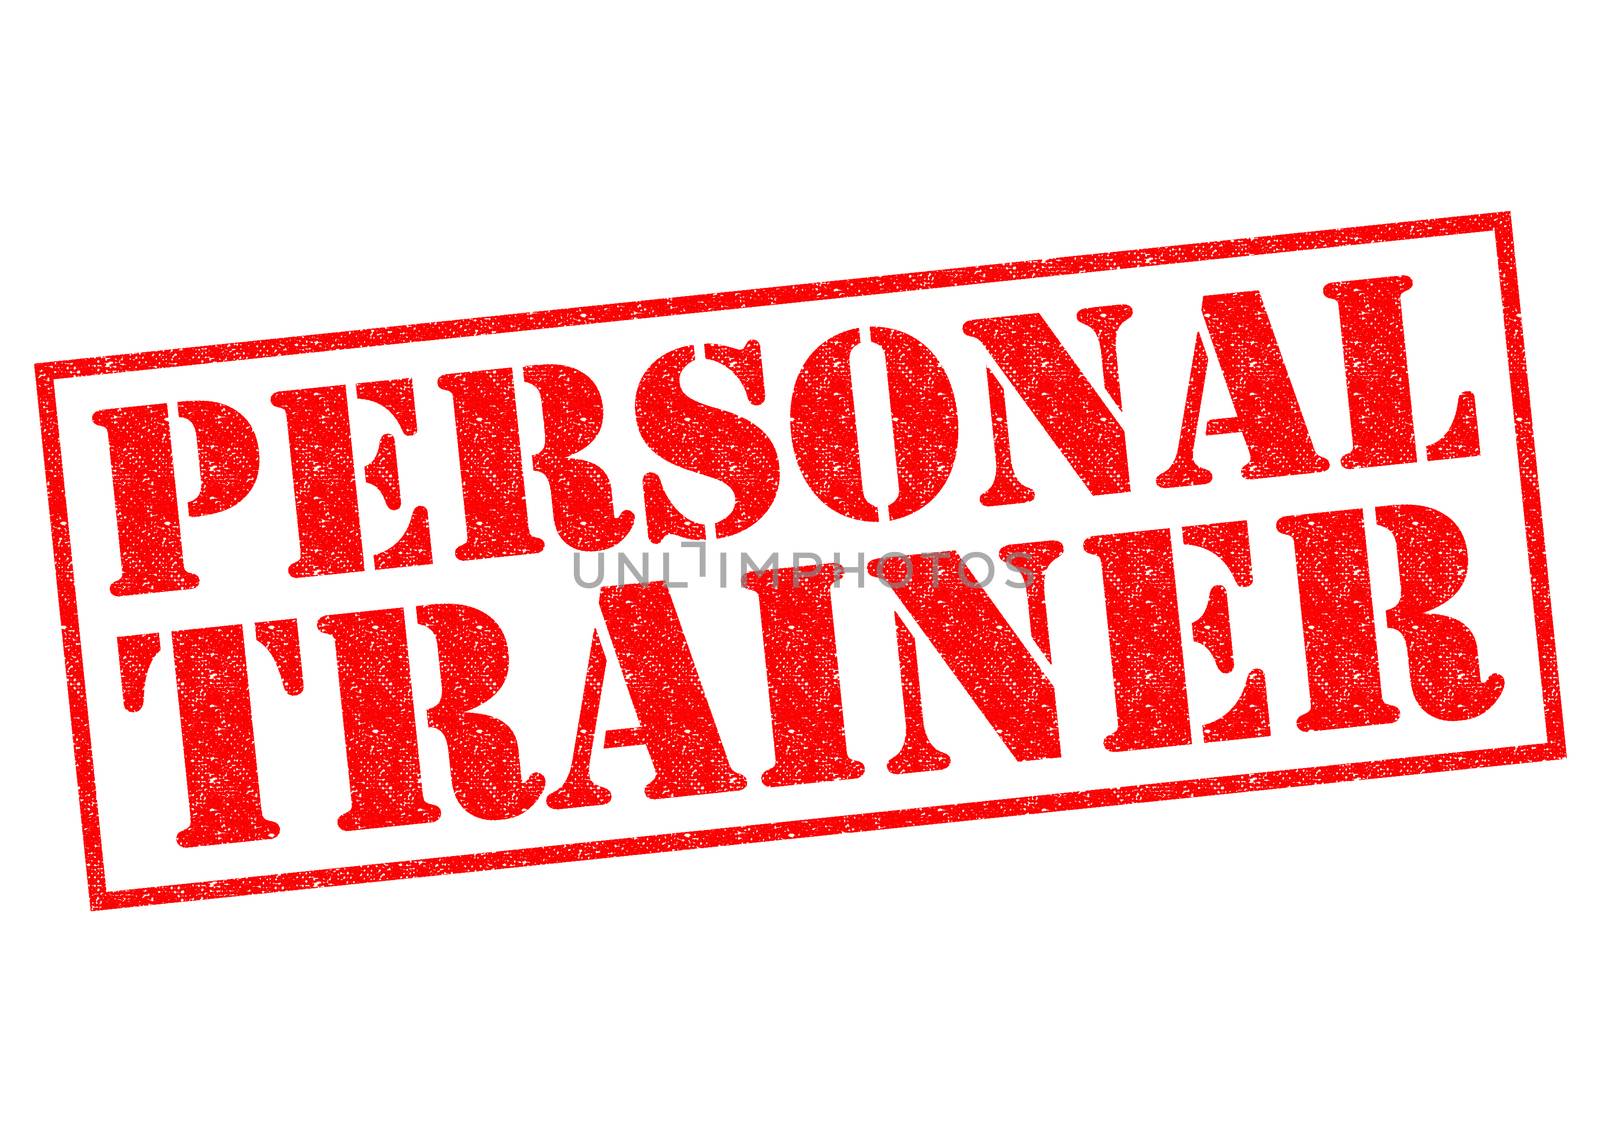 PERSONAL TRAINER red Rubber Stamp over a white background.